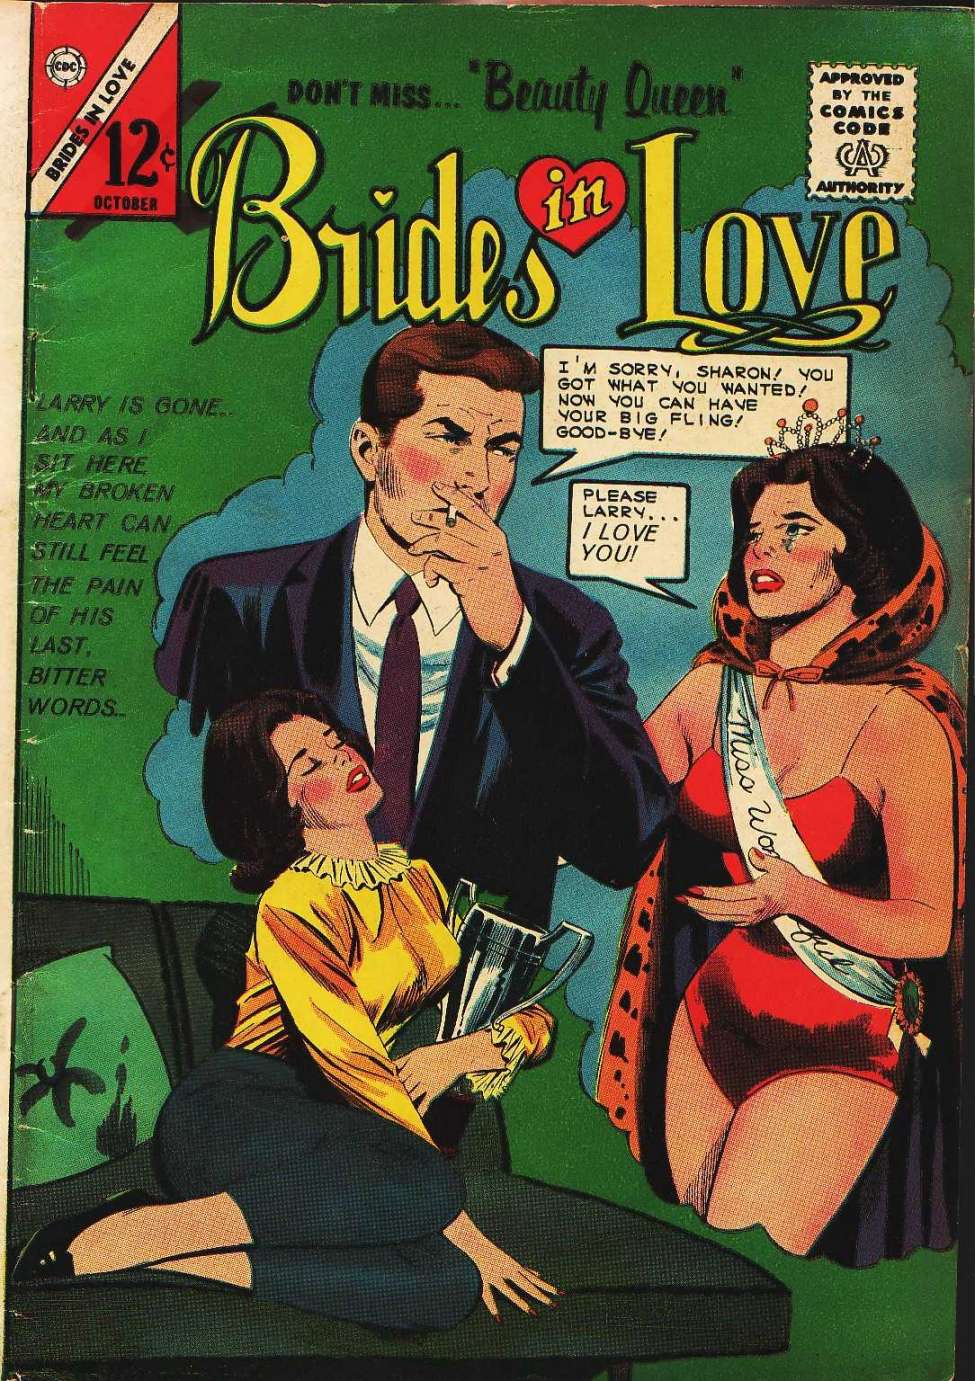 Book Cover For Brides in Love 43 - Version 1